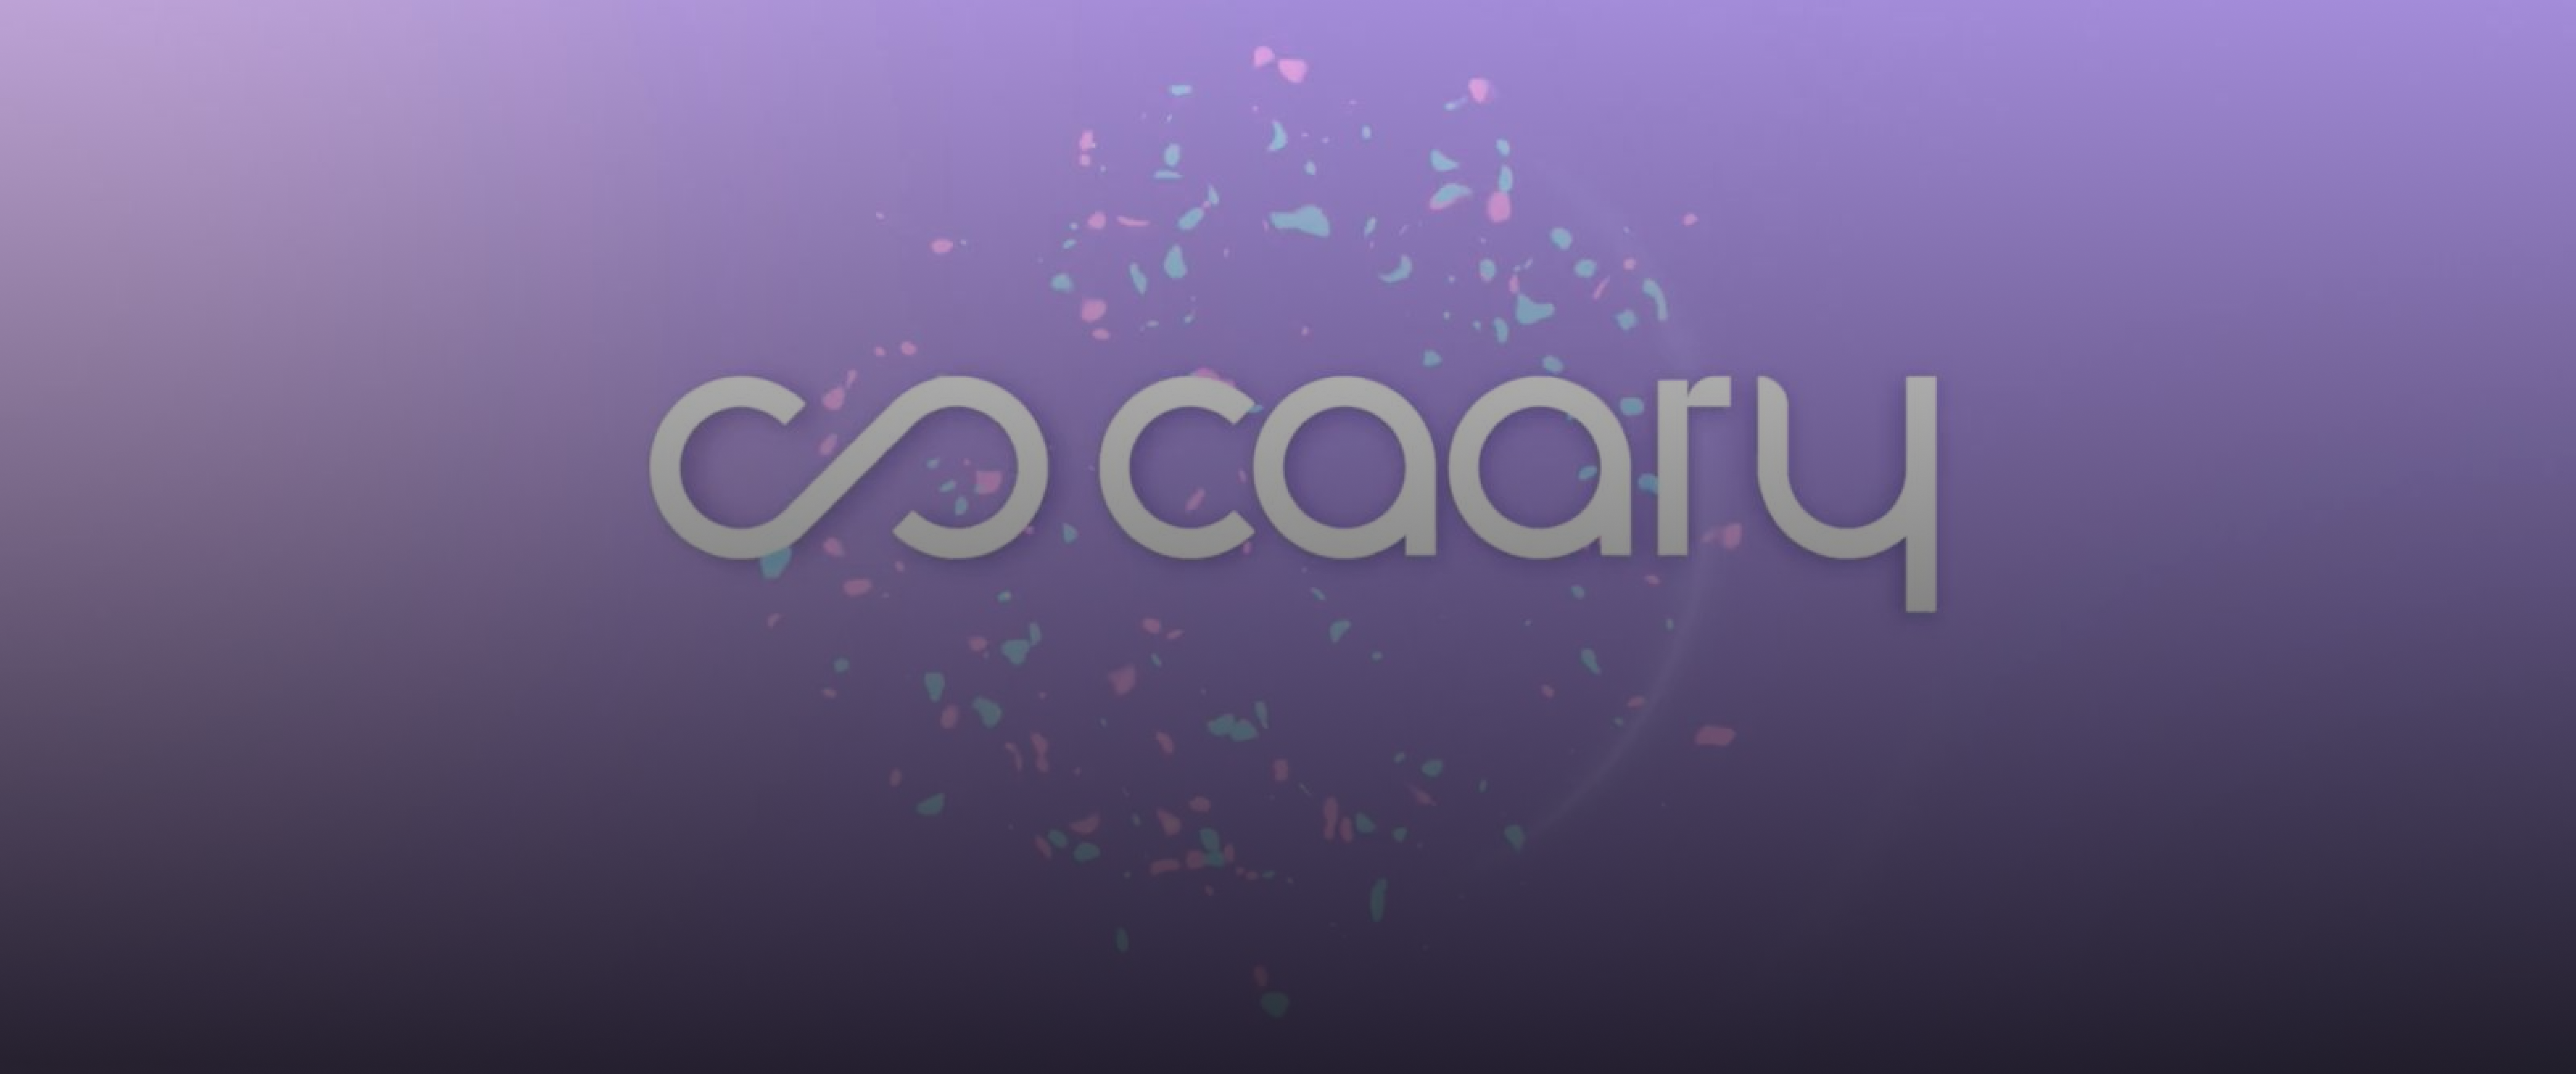 Caary case study banner image